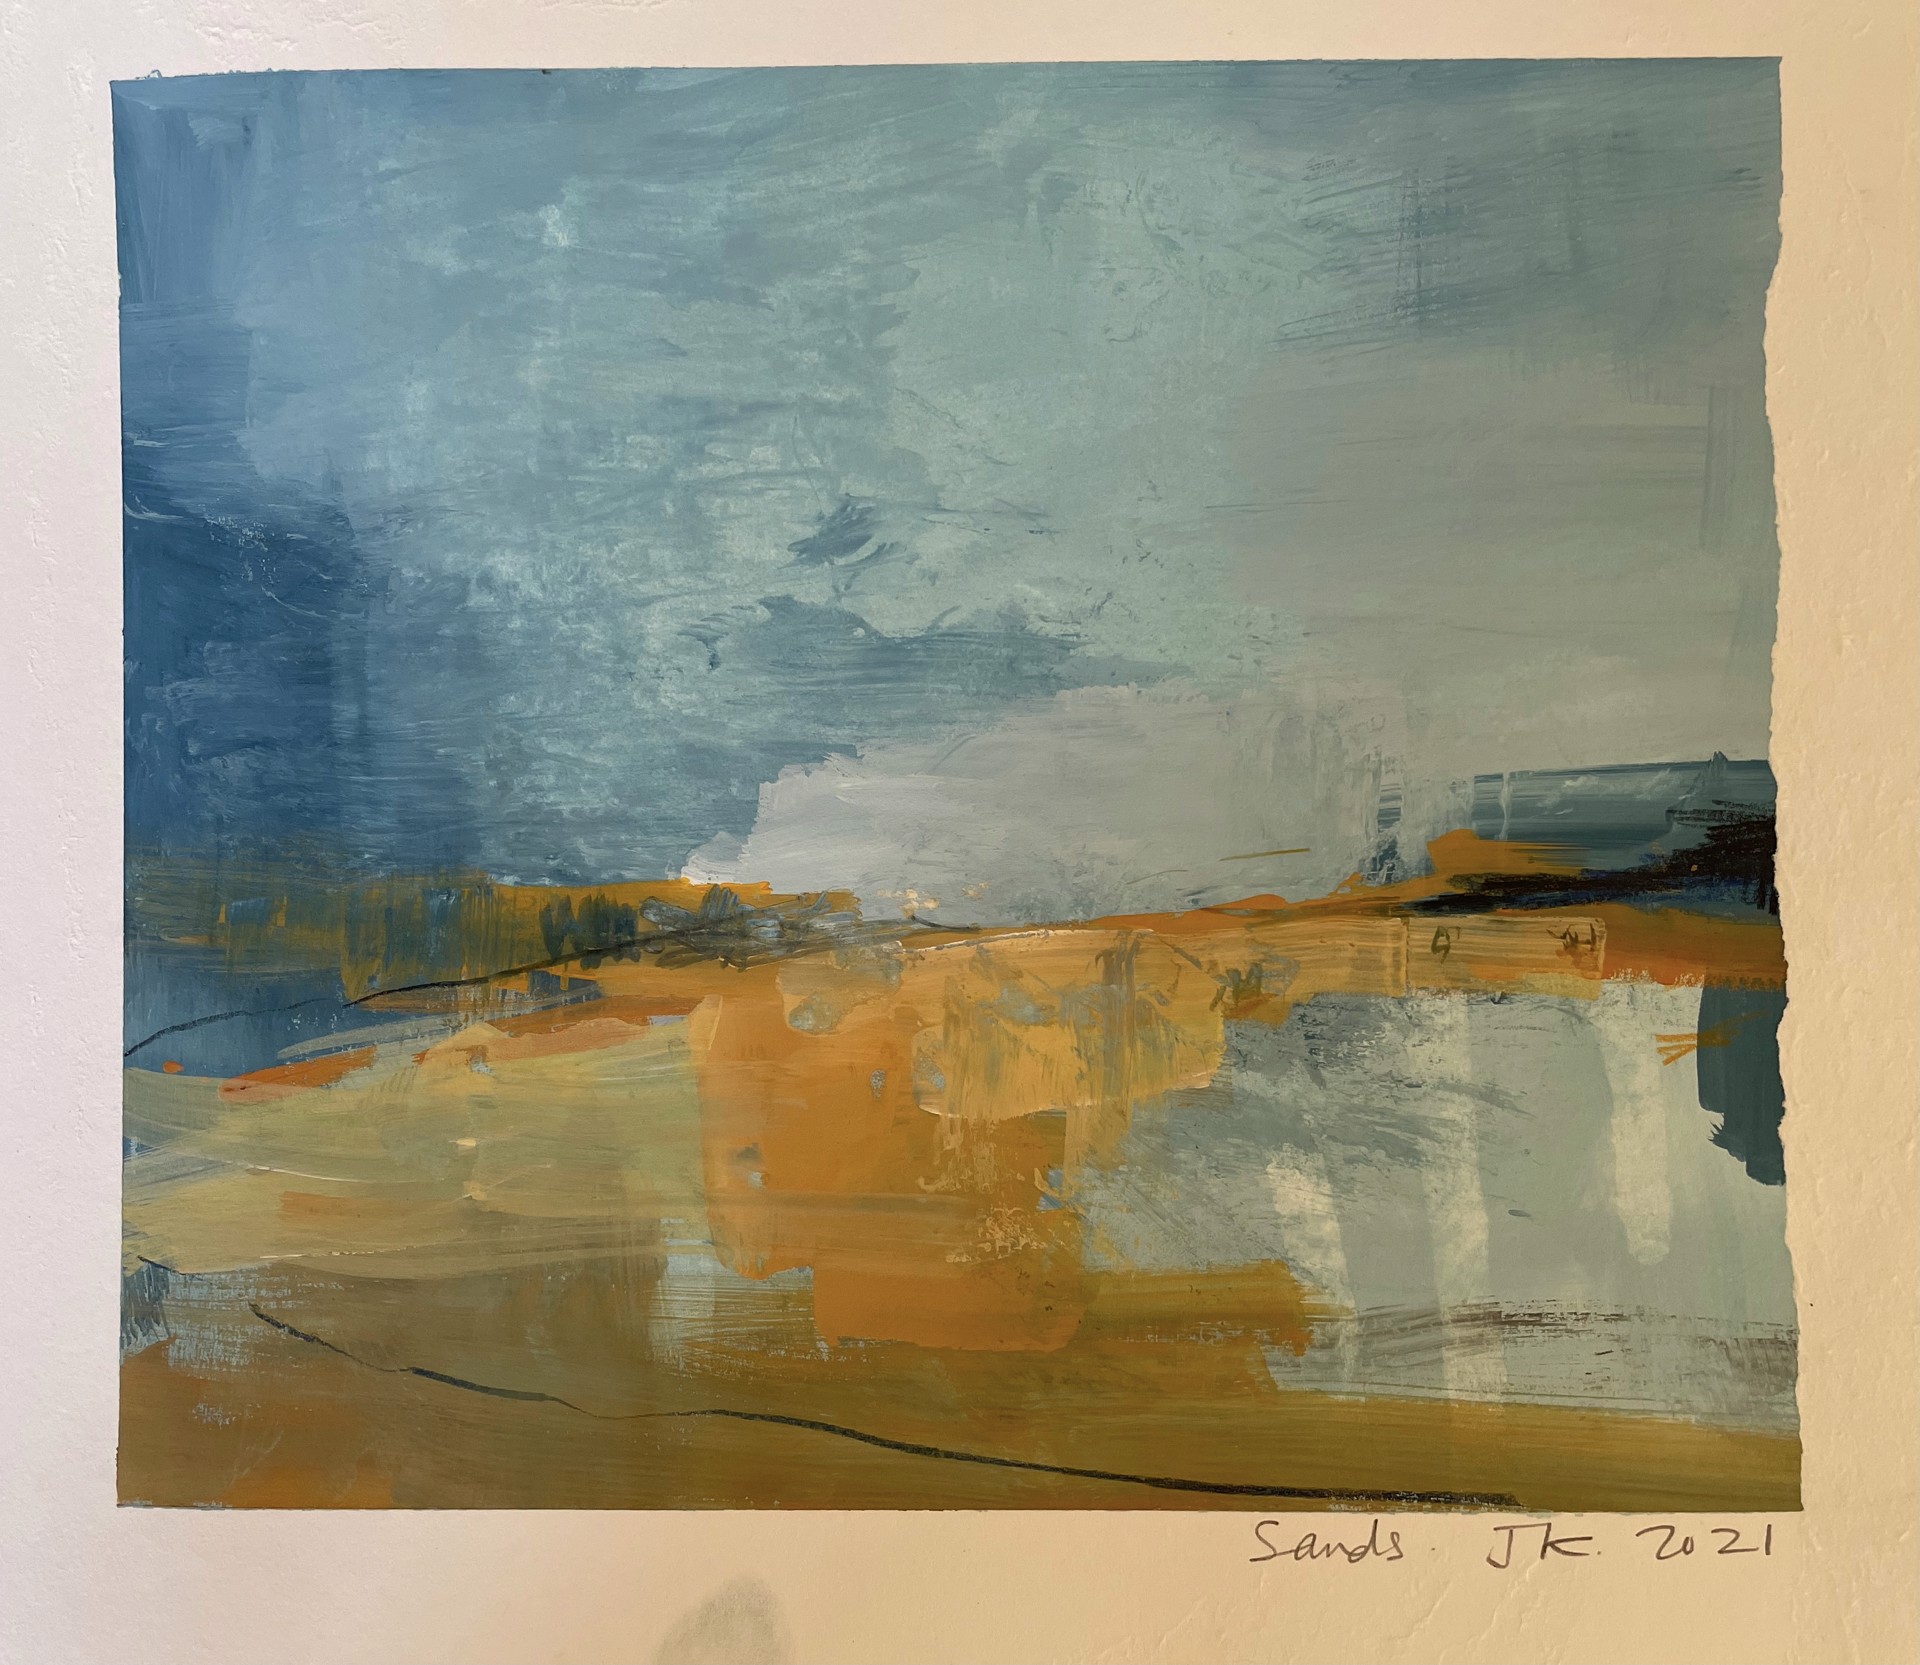 Sands Study by Jane Kell